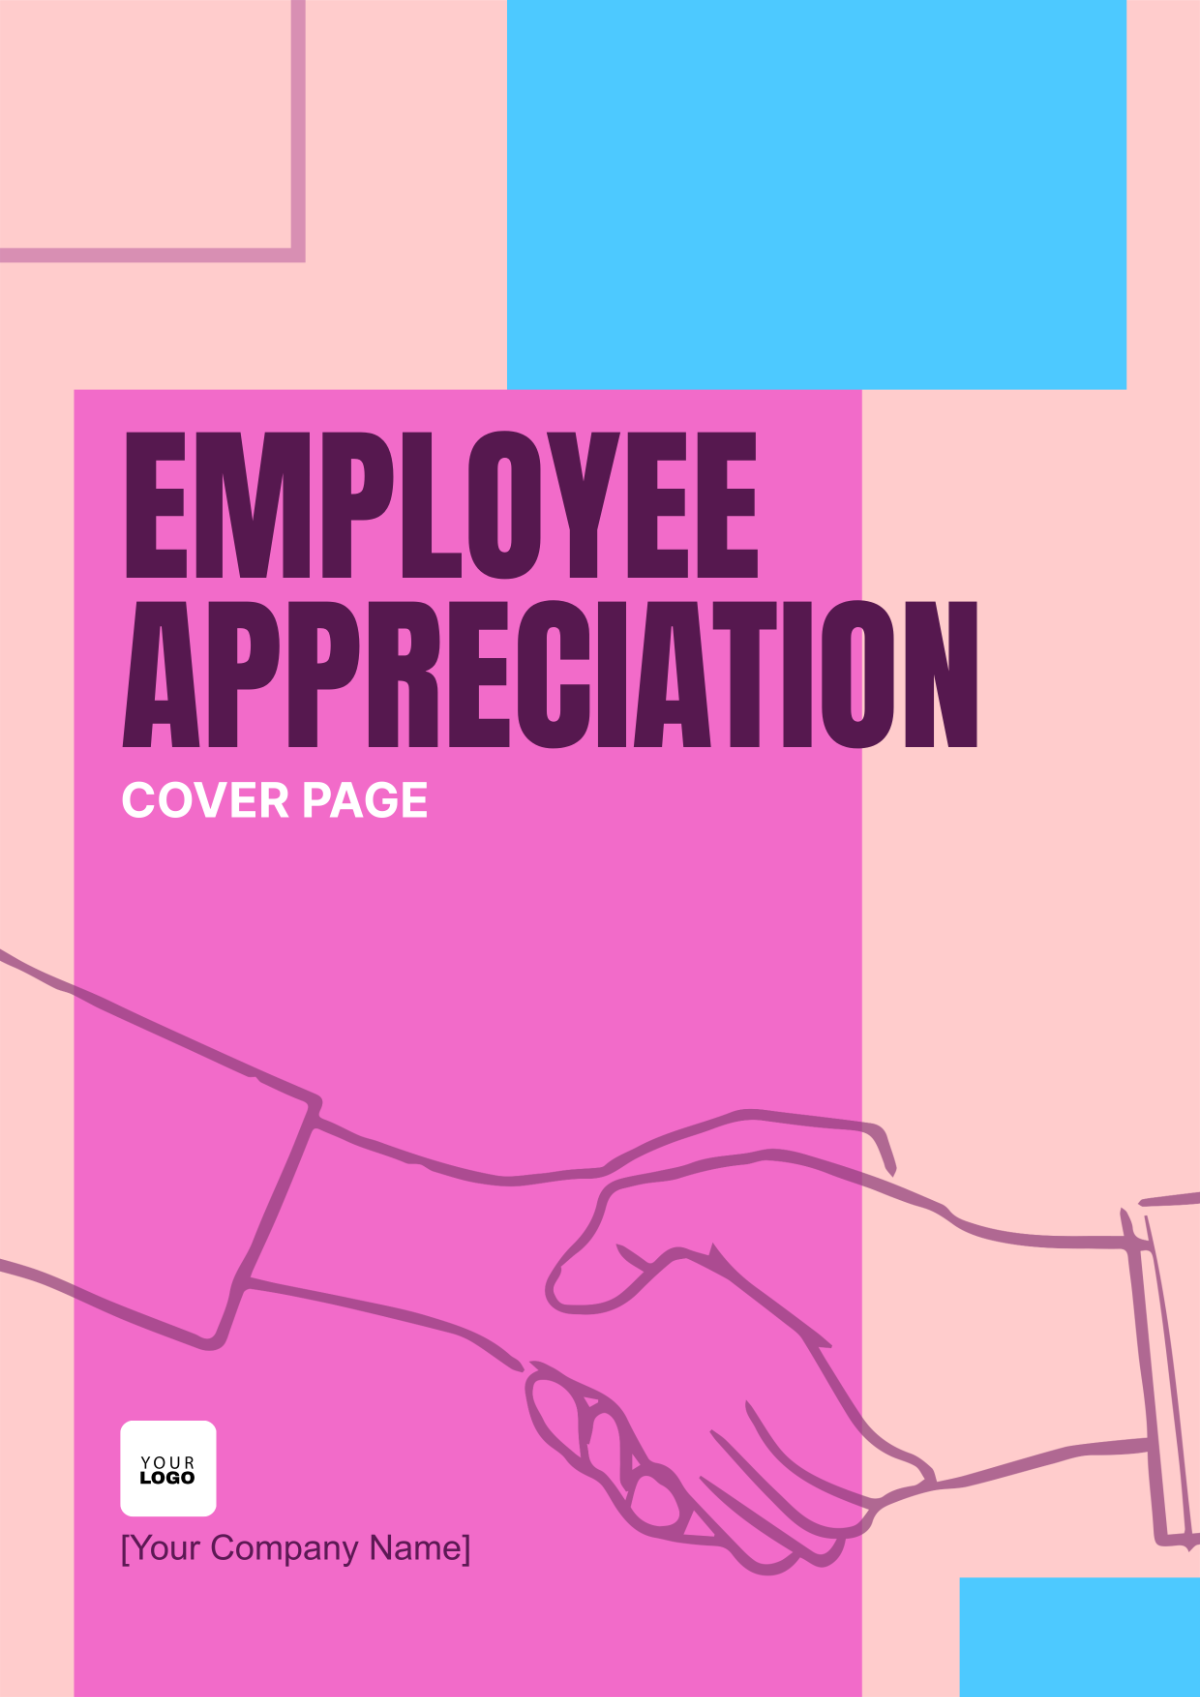 Employee Appreciation Cover Page Template